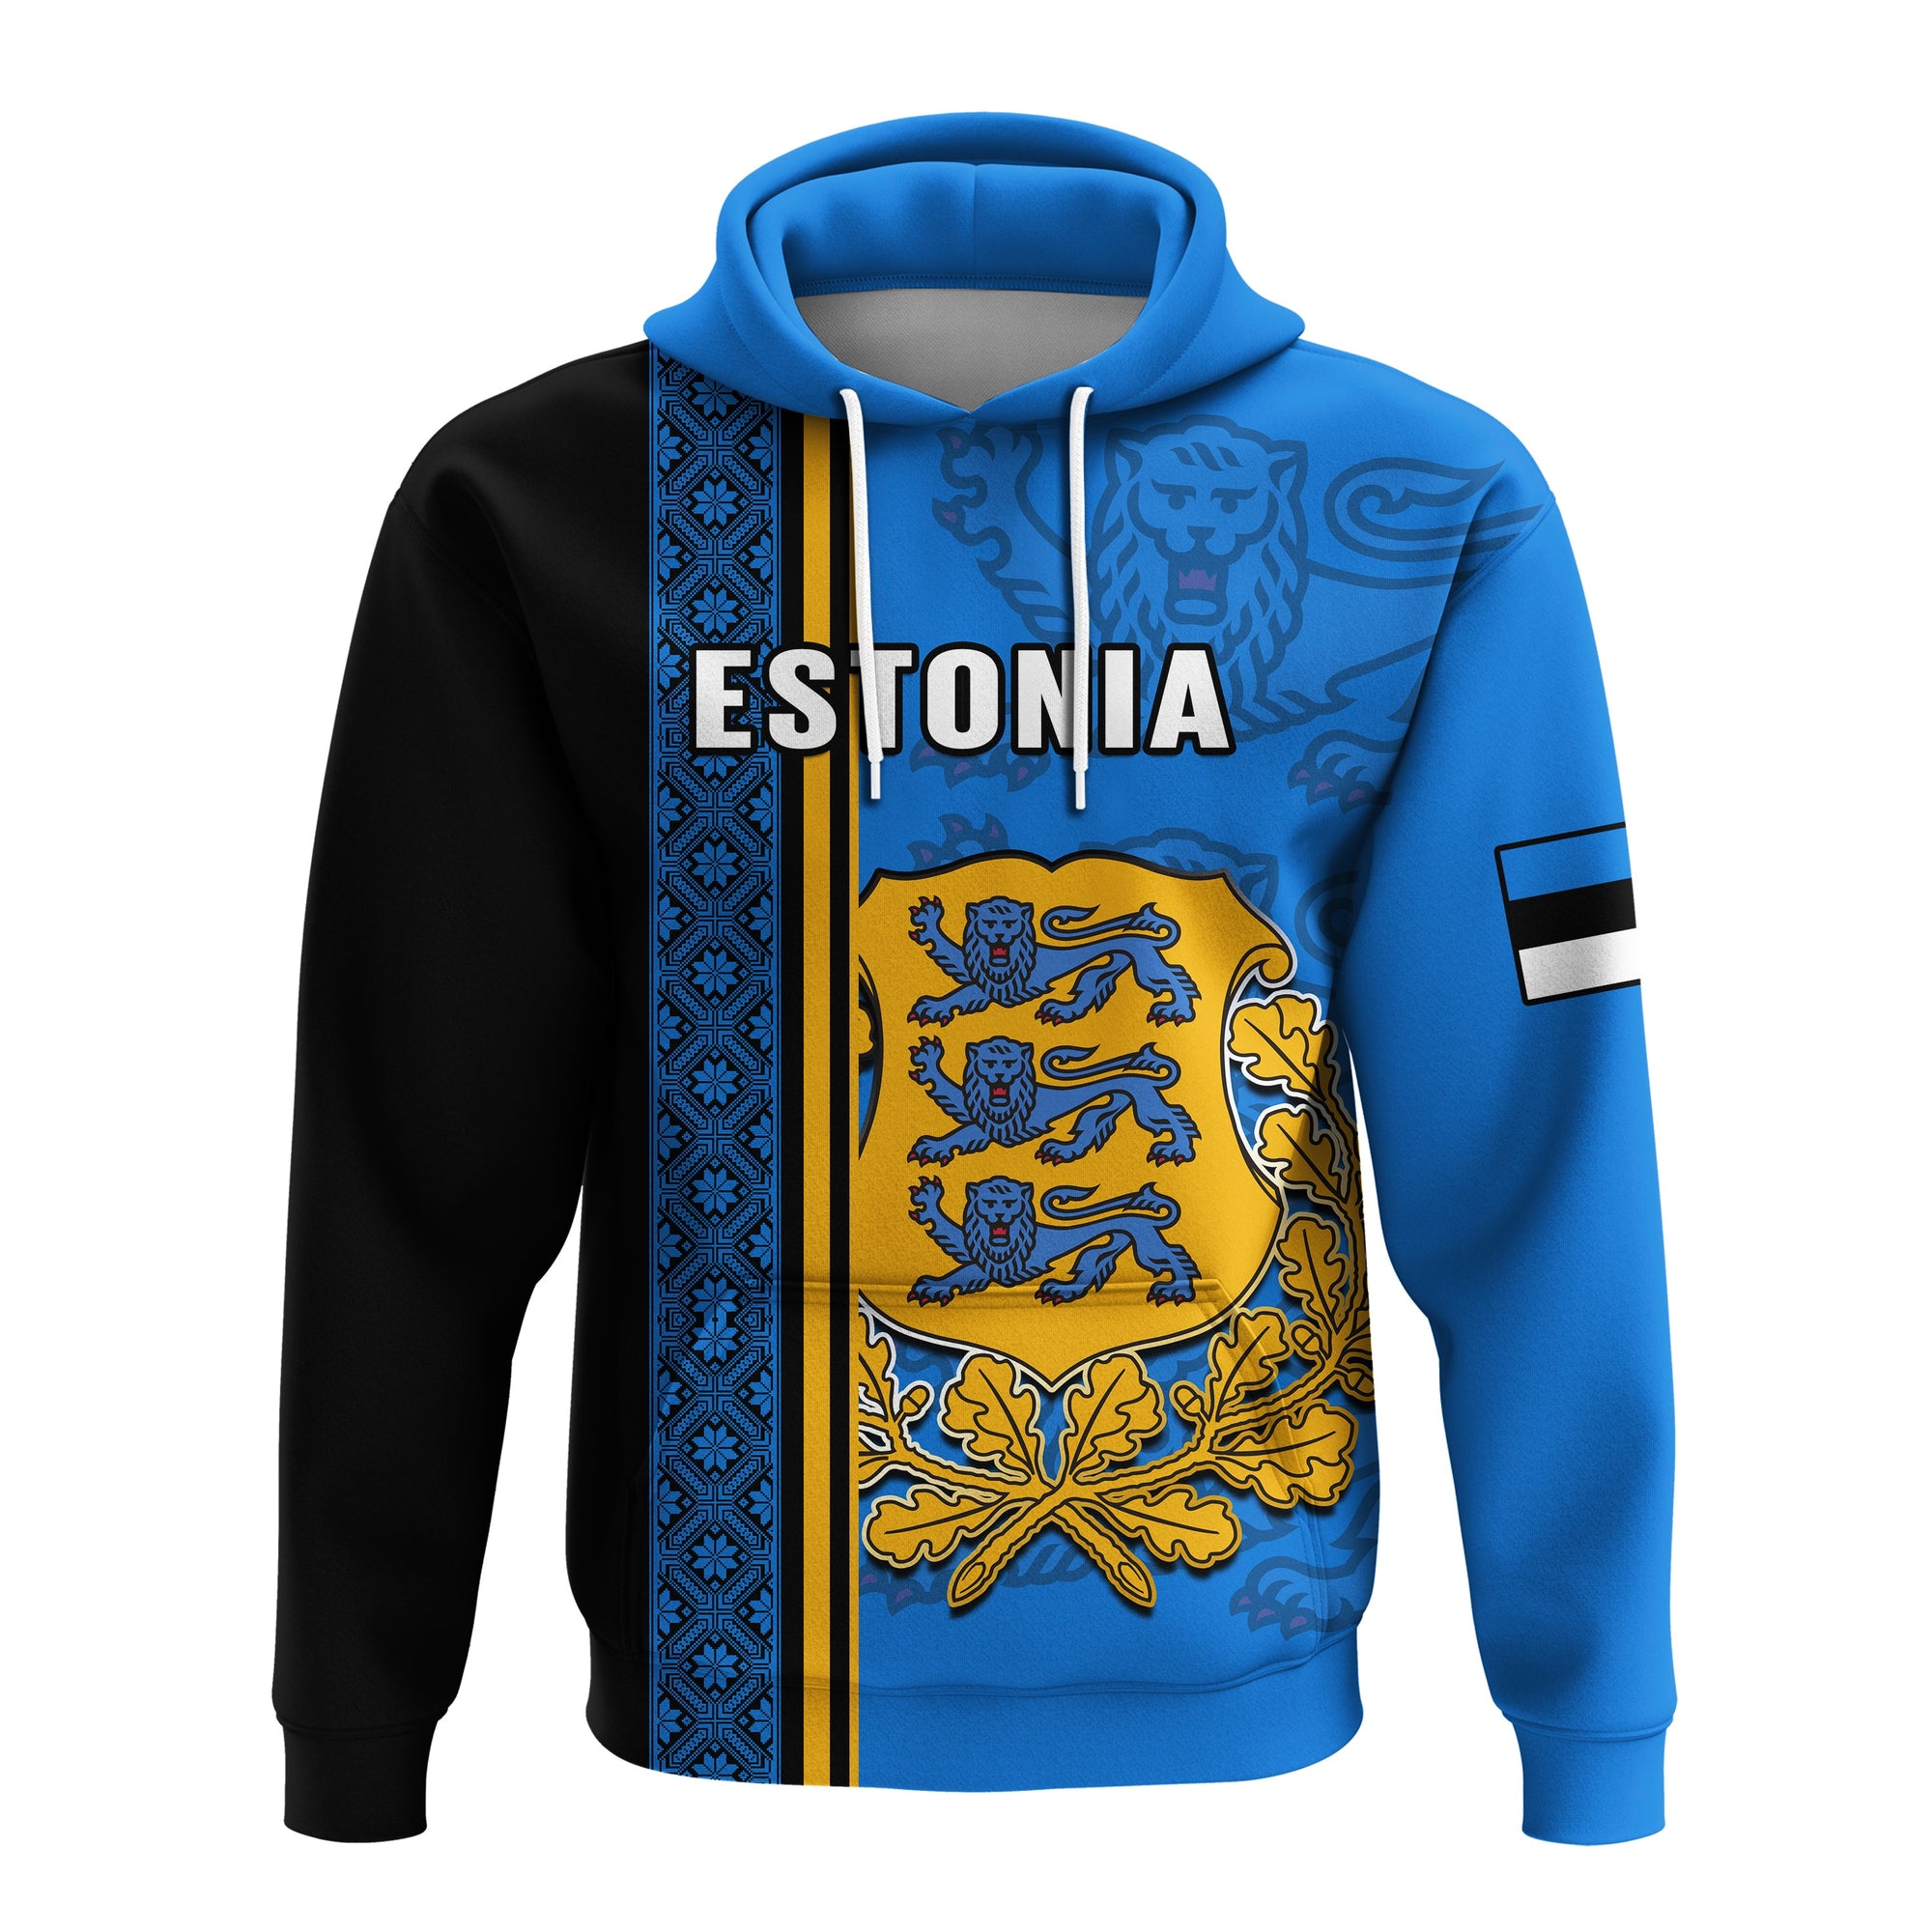 estonia-hoodie-happy-estonian-independence-day-with-coat-of-arms